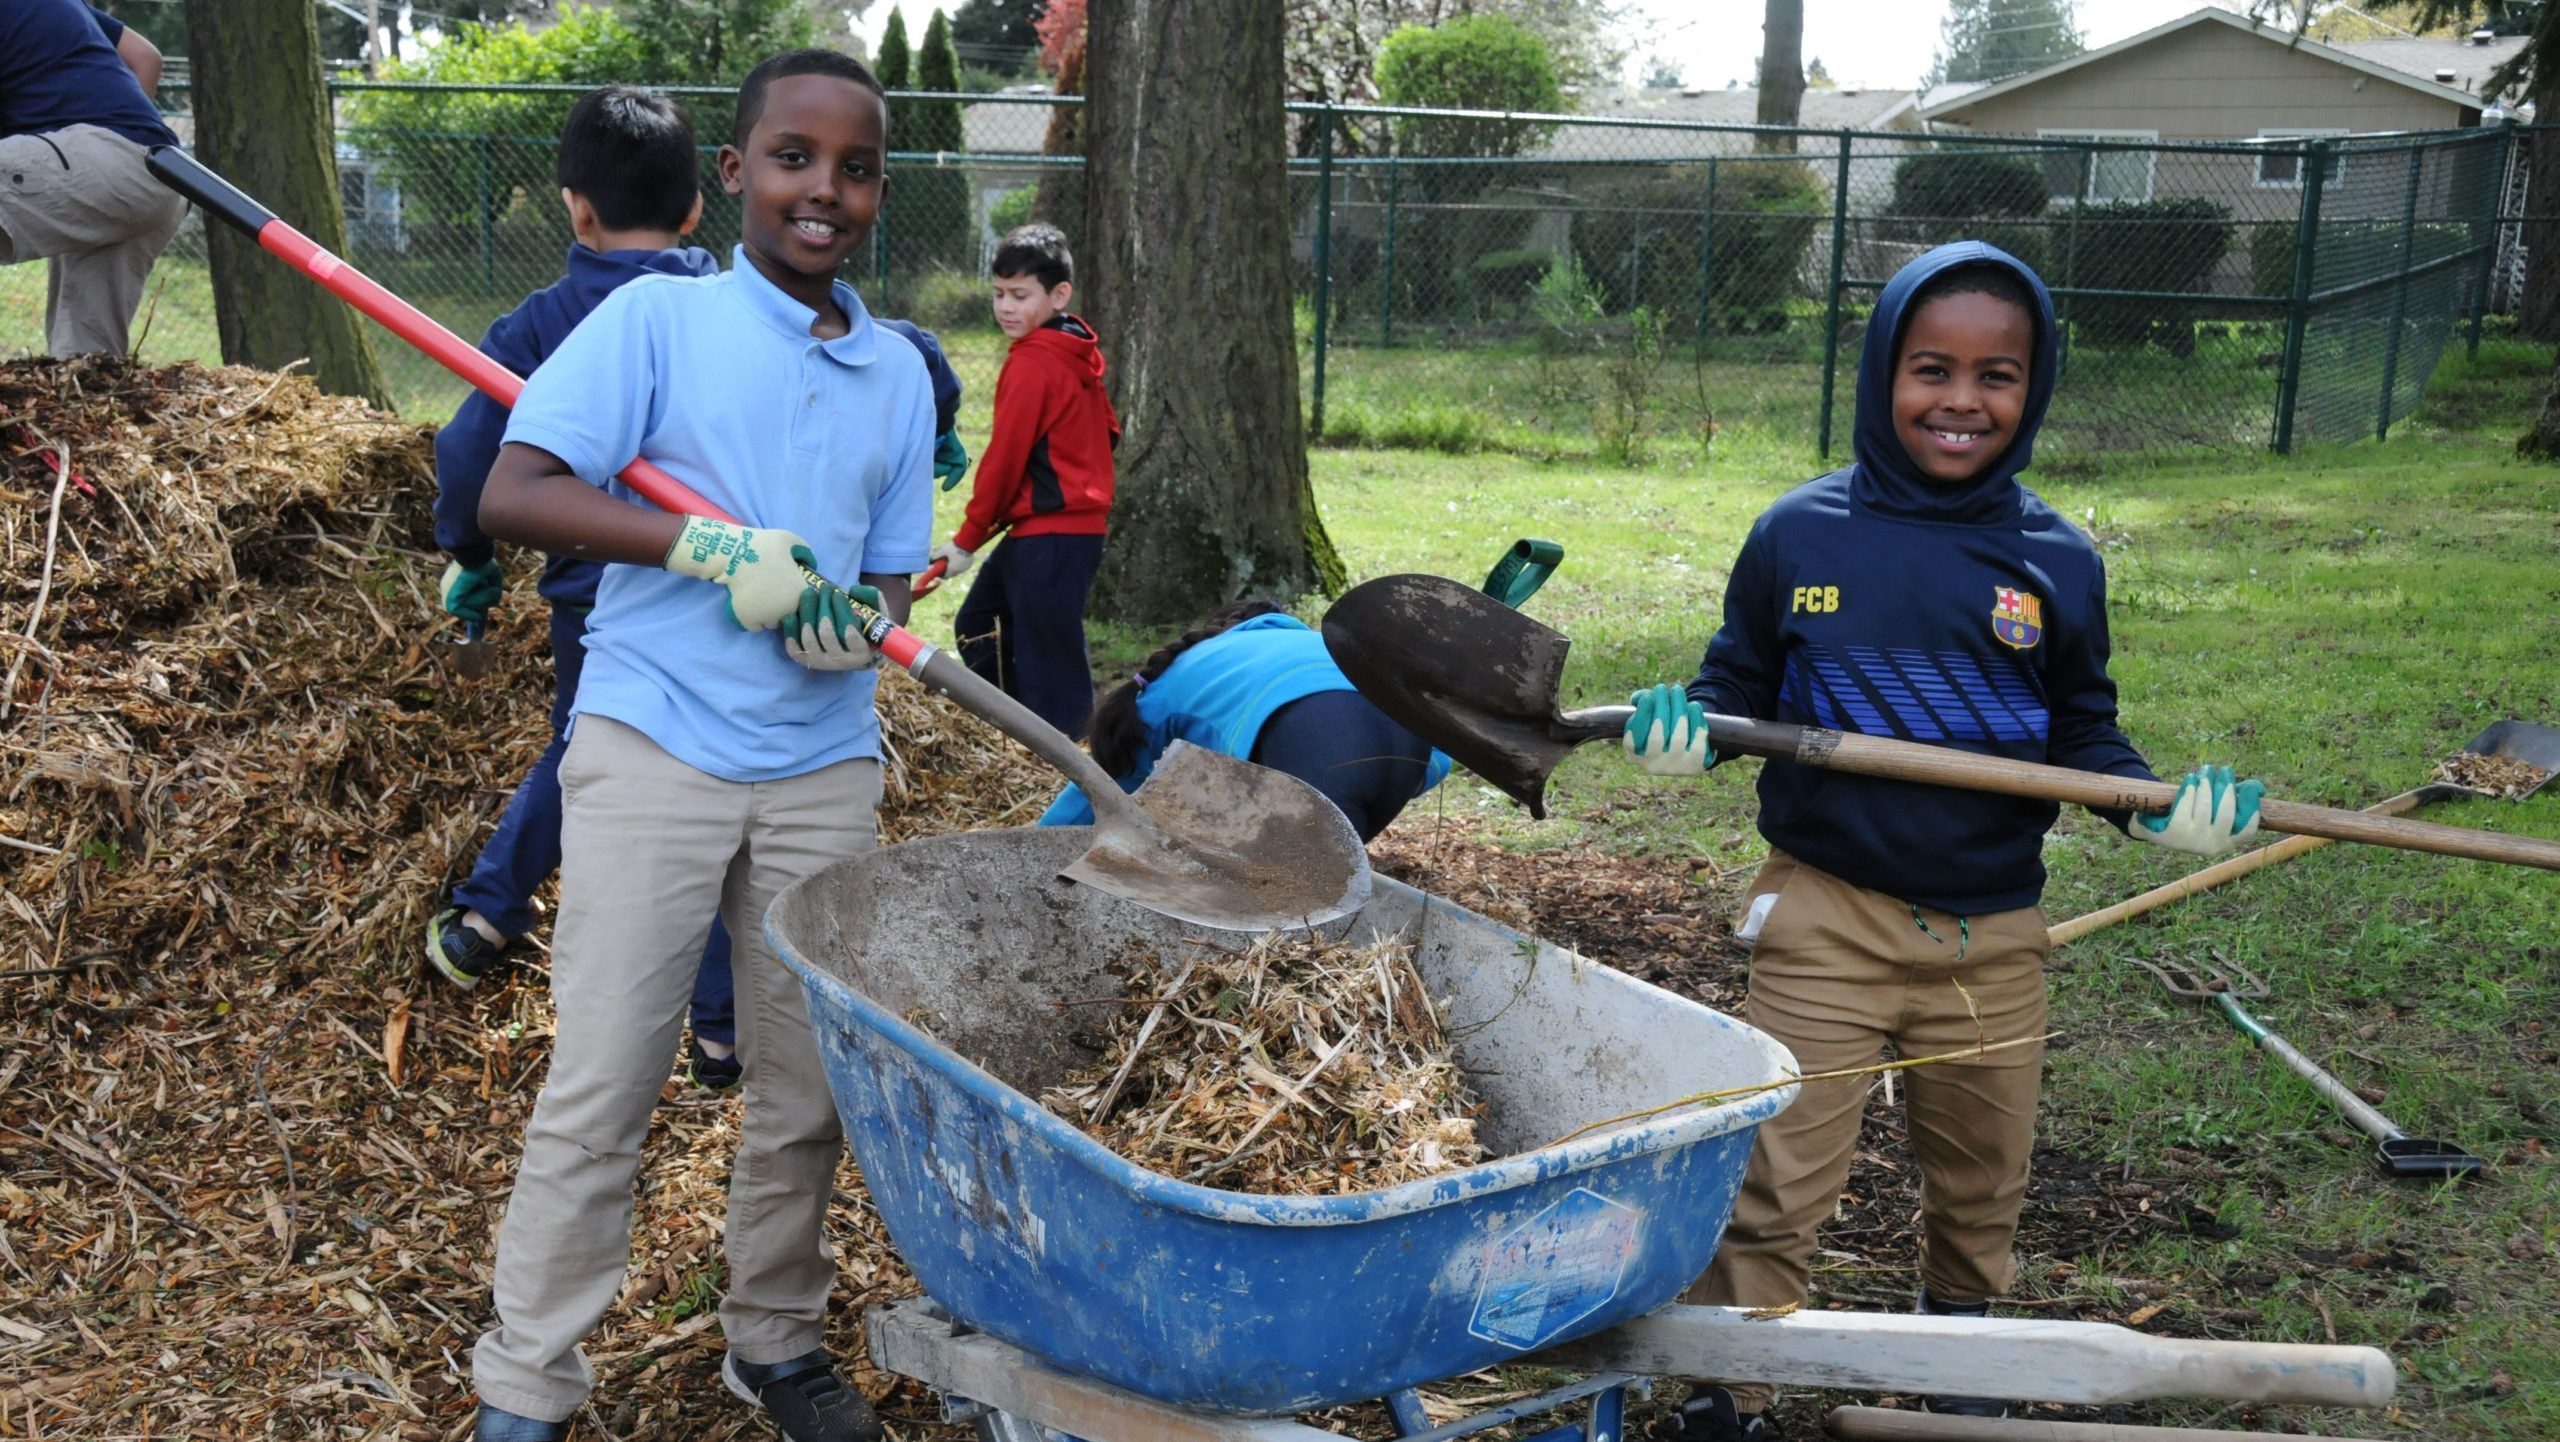 2 elementary school students pose for a picture holding shovels in front of a wheelbarrow full of mulch.